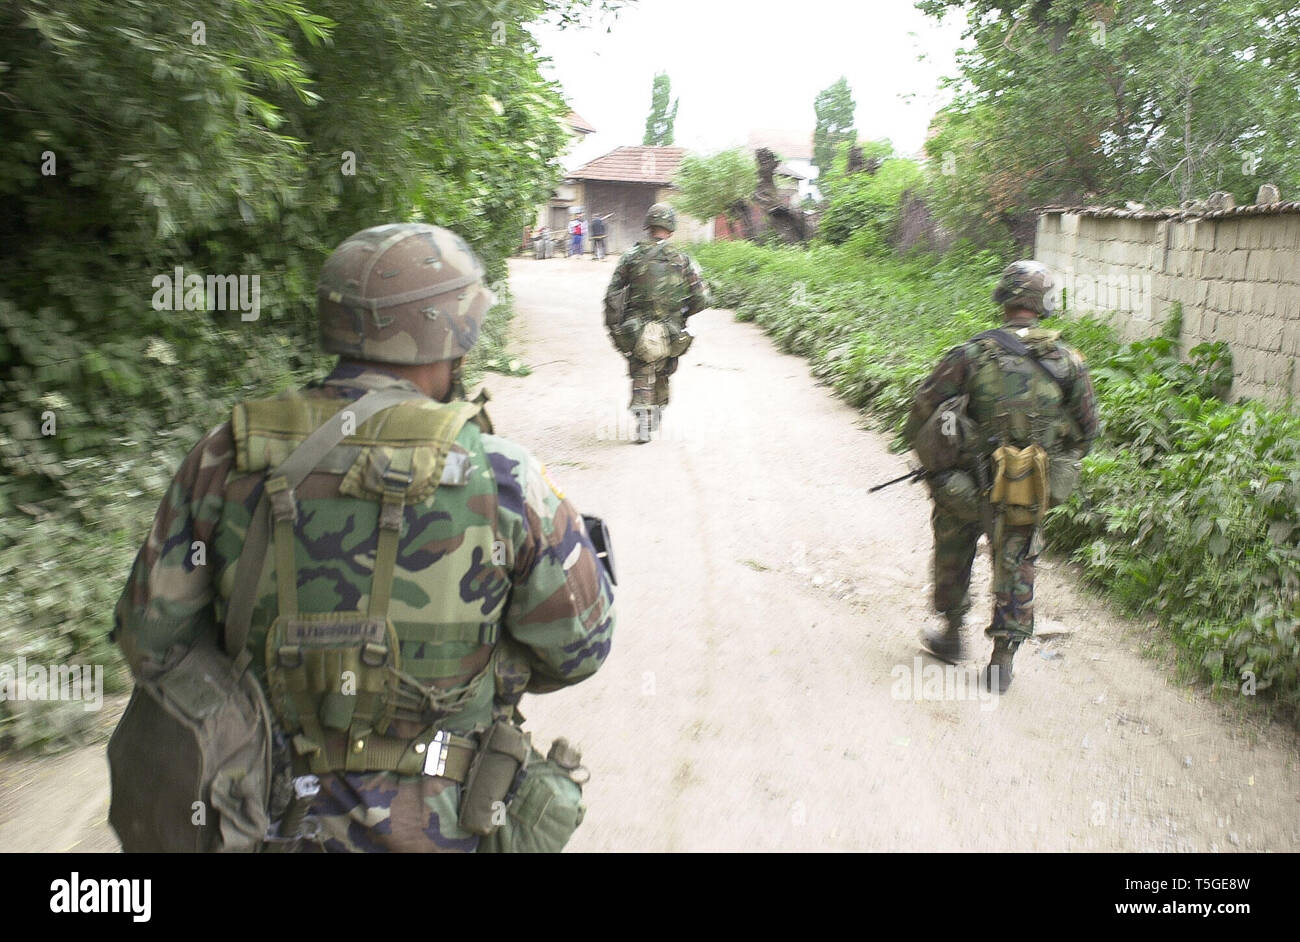 Mogila, Kosovo, Yugoslavia. 30th May, 2000. A patrol from Bravo Company, 1st Battalion, 187th Infantry Regiment patrols through the ethnically mixed town of Mogilla, Kosovo, Yugoslavia, May 30, 2000.The platoon was nicknamed Orange Crush lived in and patroled town from a 500-year old Serbian Orthodox Church.They constantly patroled and tried to keep the two ethnic groups from attacking each other. Credit: Bill Putnam/ZUMA Wire/Alamy Live News Stock Photo